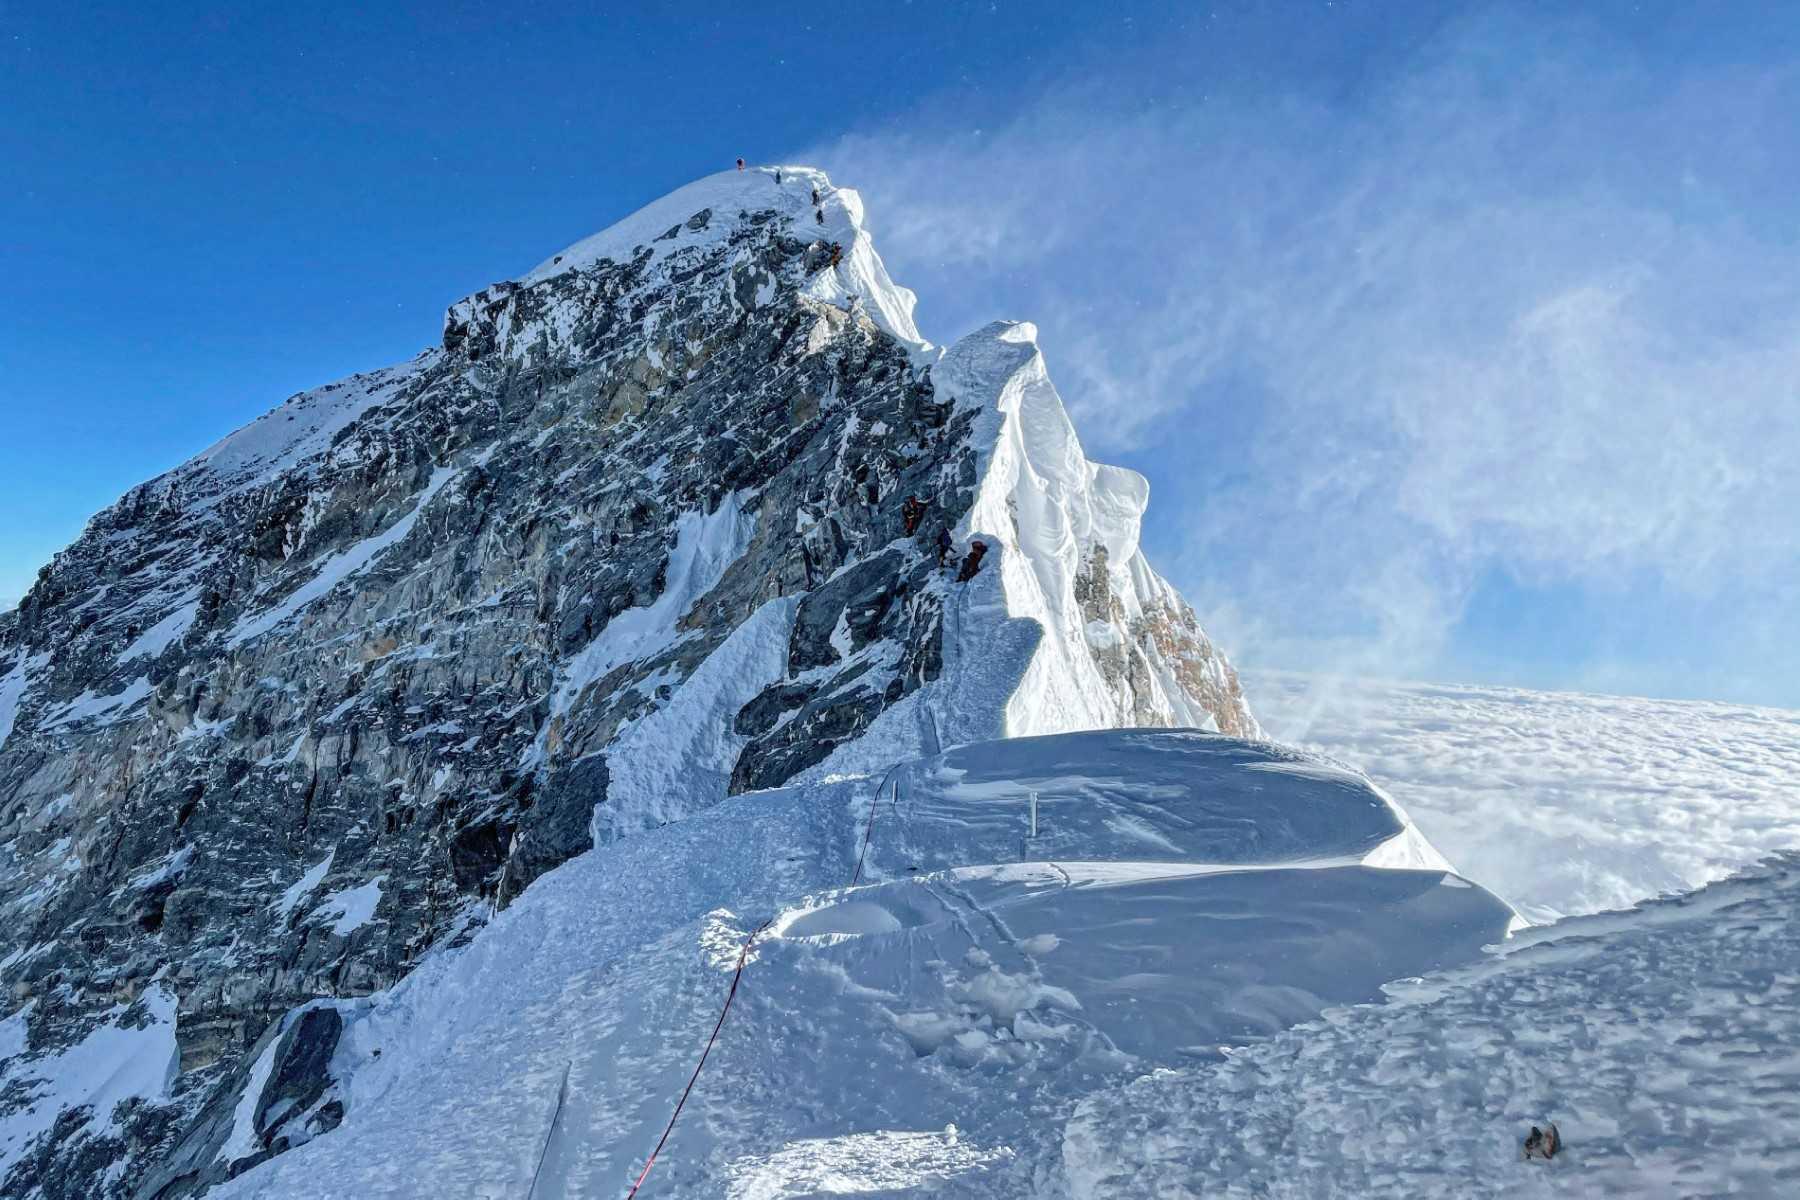 Mountaineers ascend the South face to summit Mount Everest in Nepal. Photo: AFP